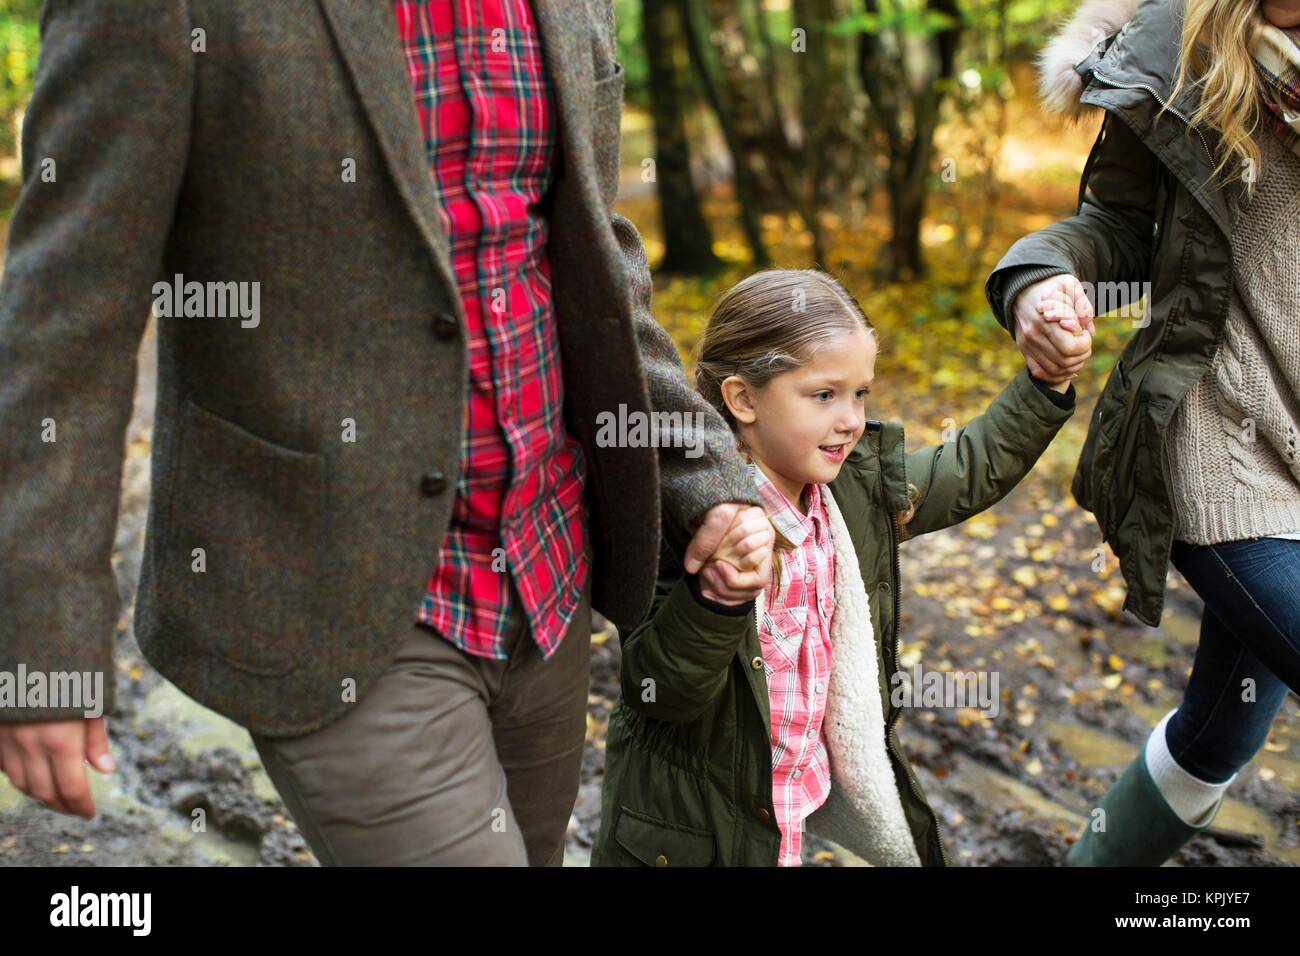 Young girl on a walk holding hands with her parents. Stock Photo